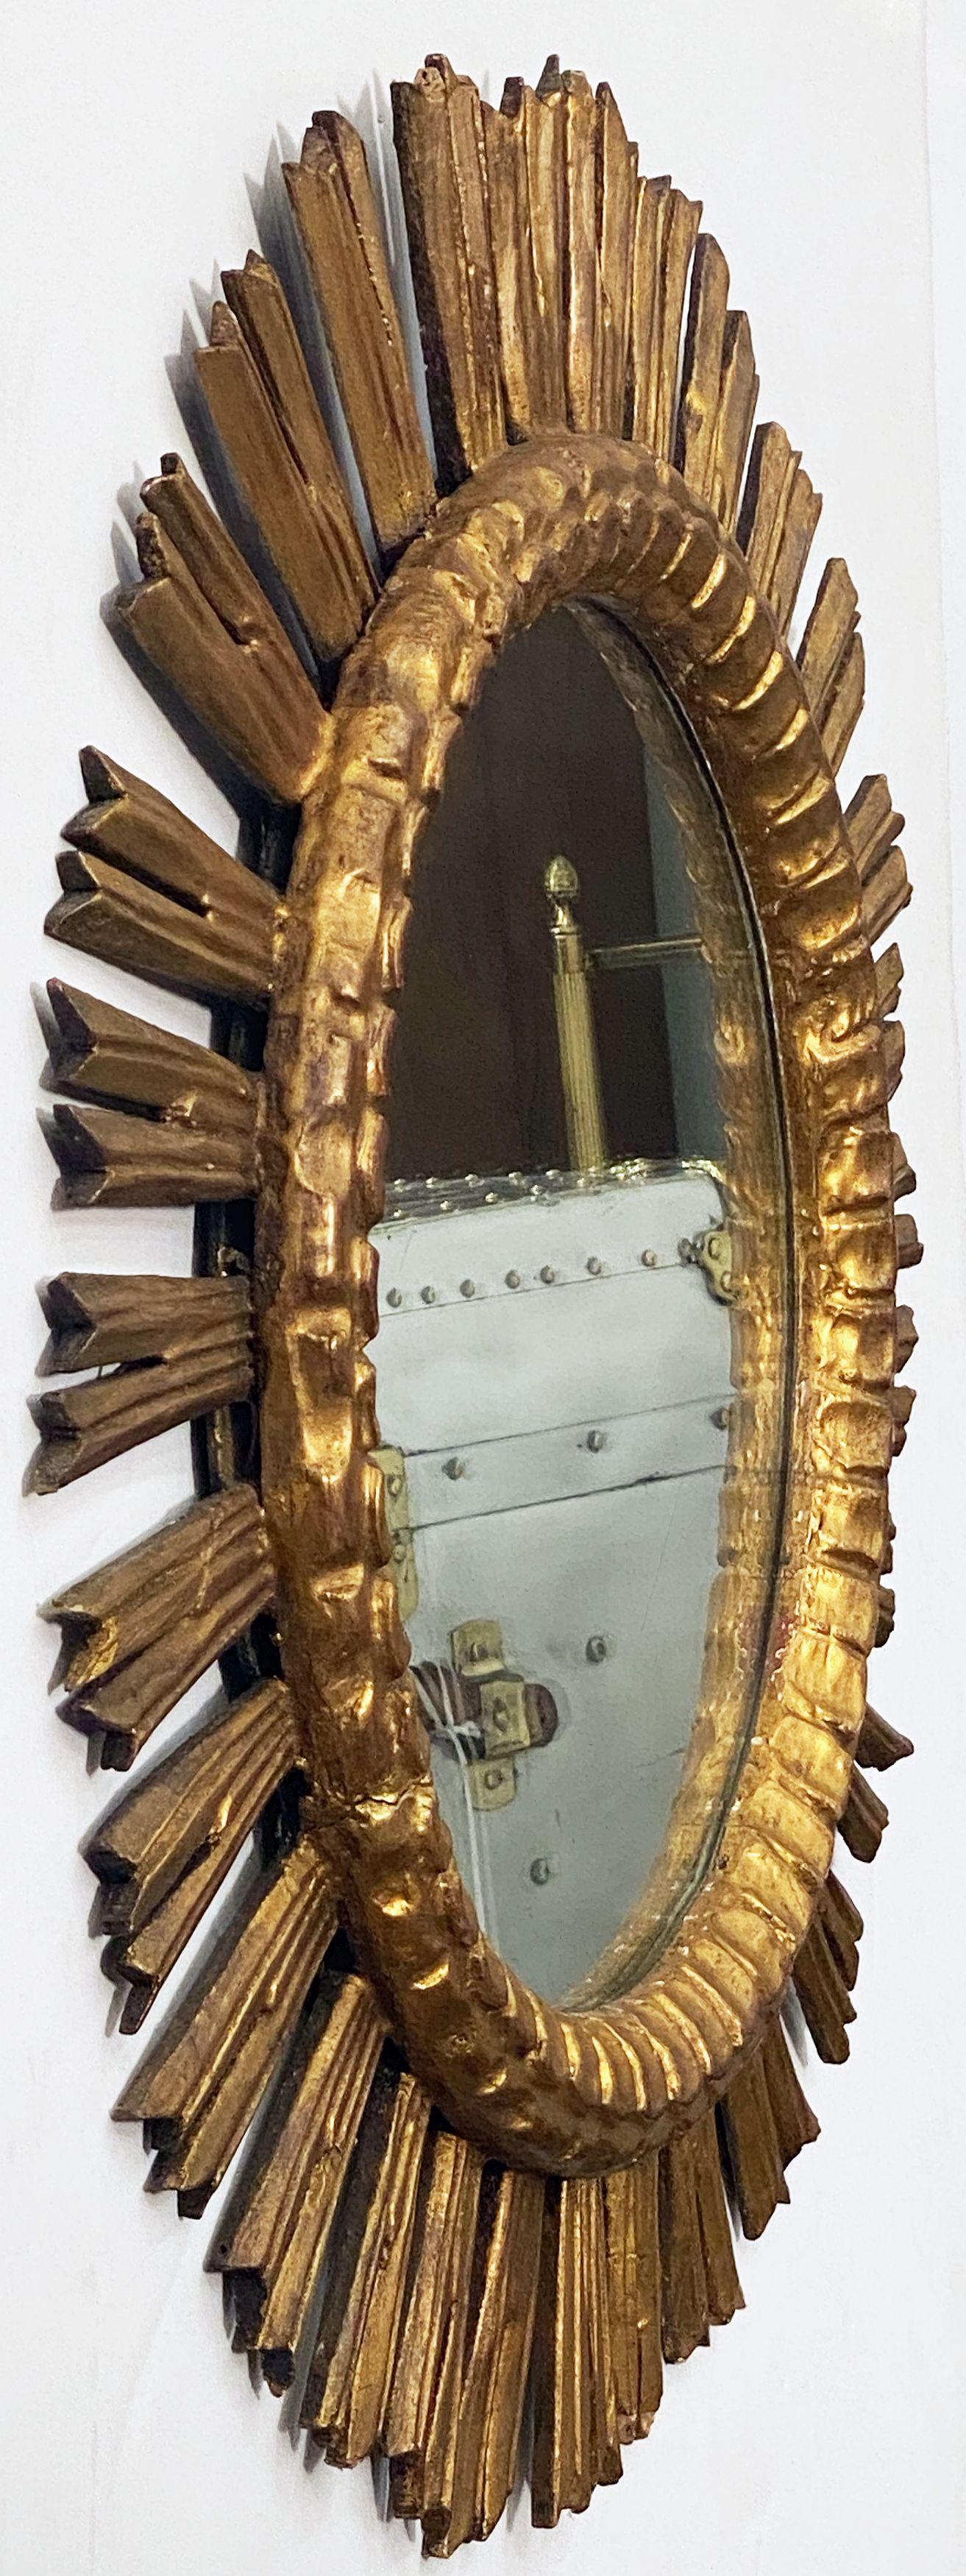 A lovely large French gilt sunburst (or starburst) mirror with round mirrored glass center in a moulded frame.

Diameter of 25 inches.